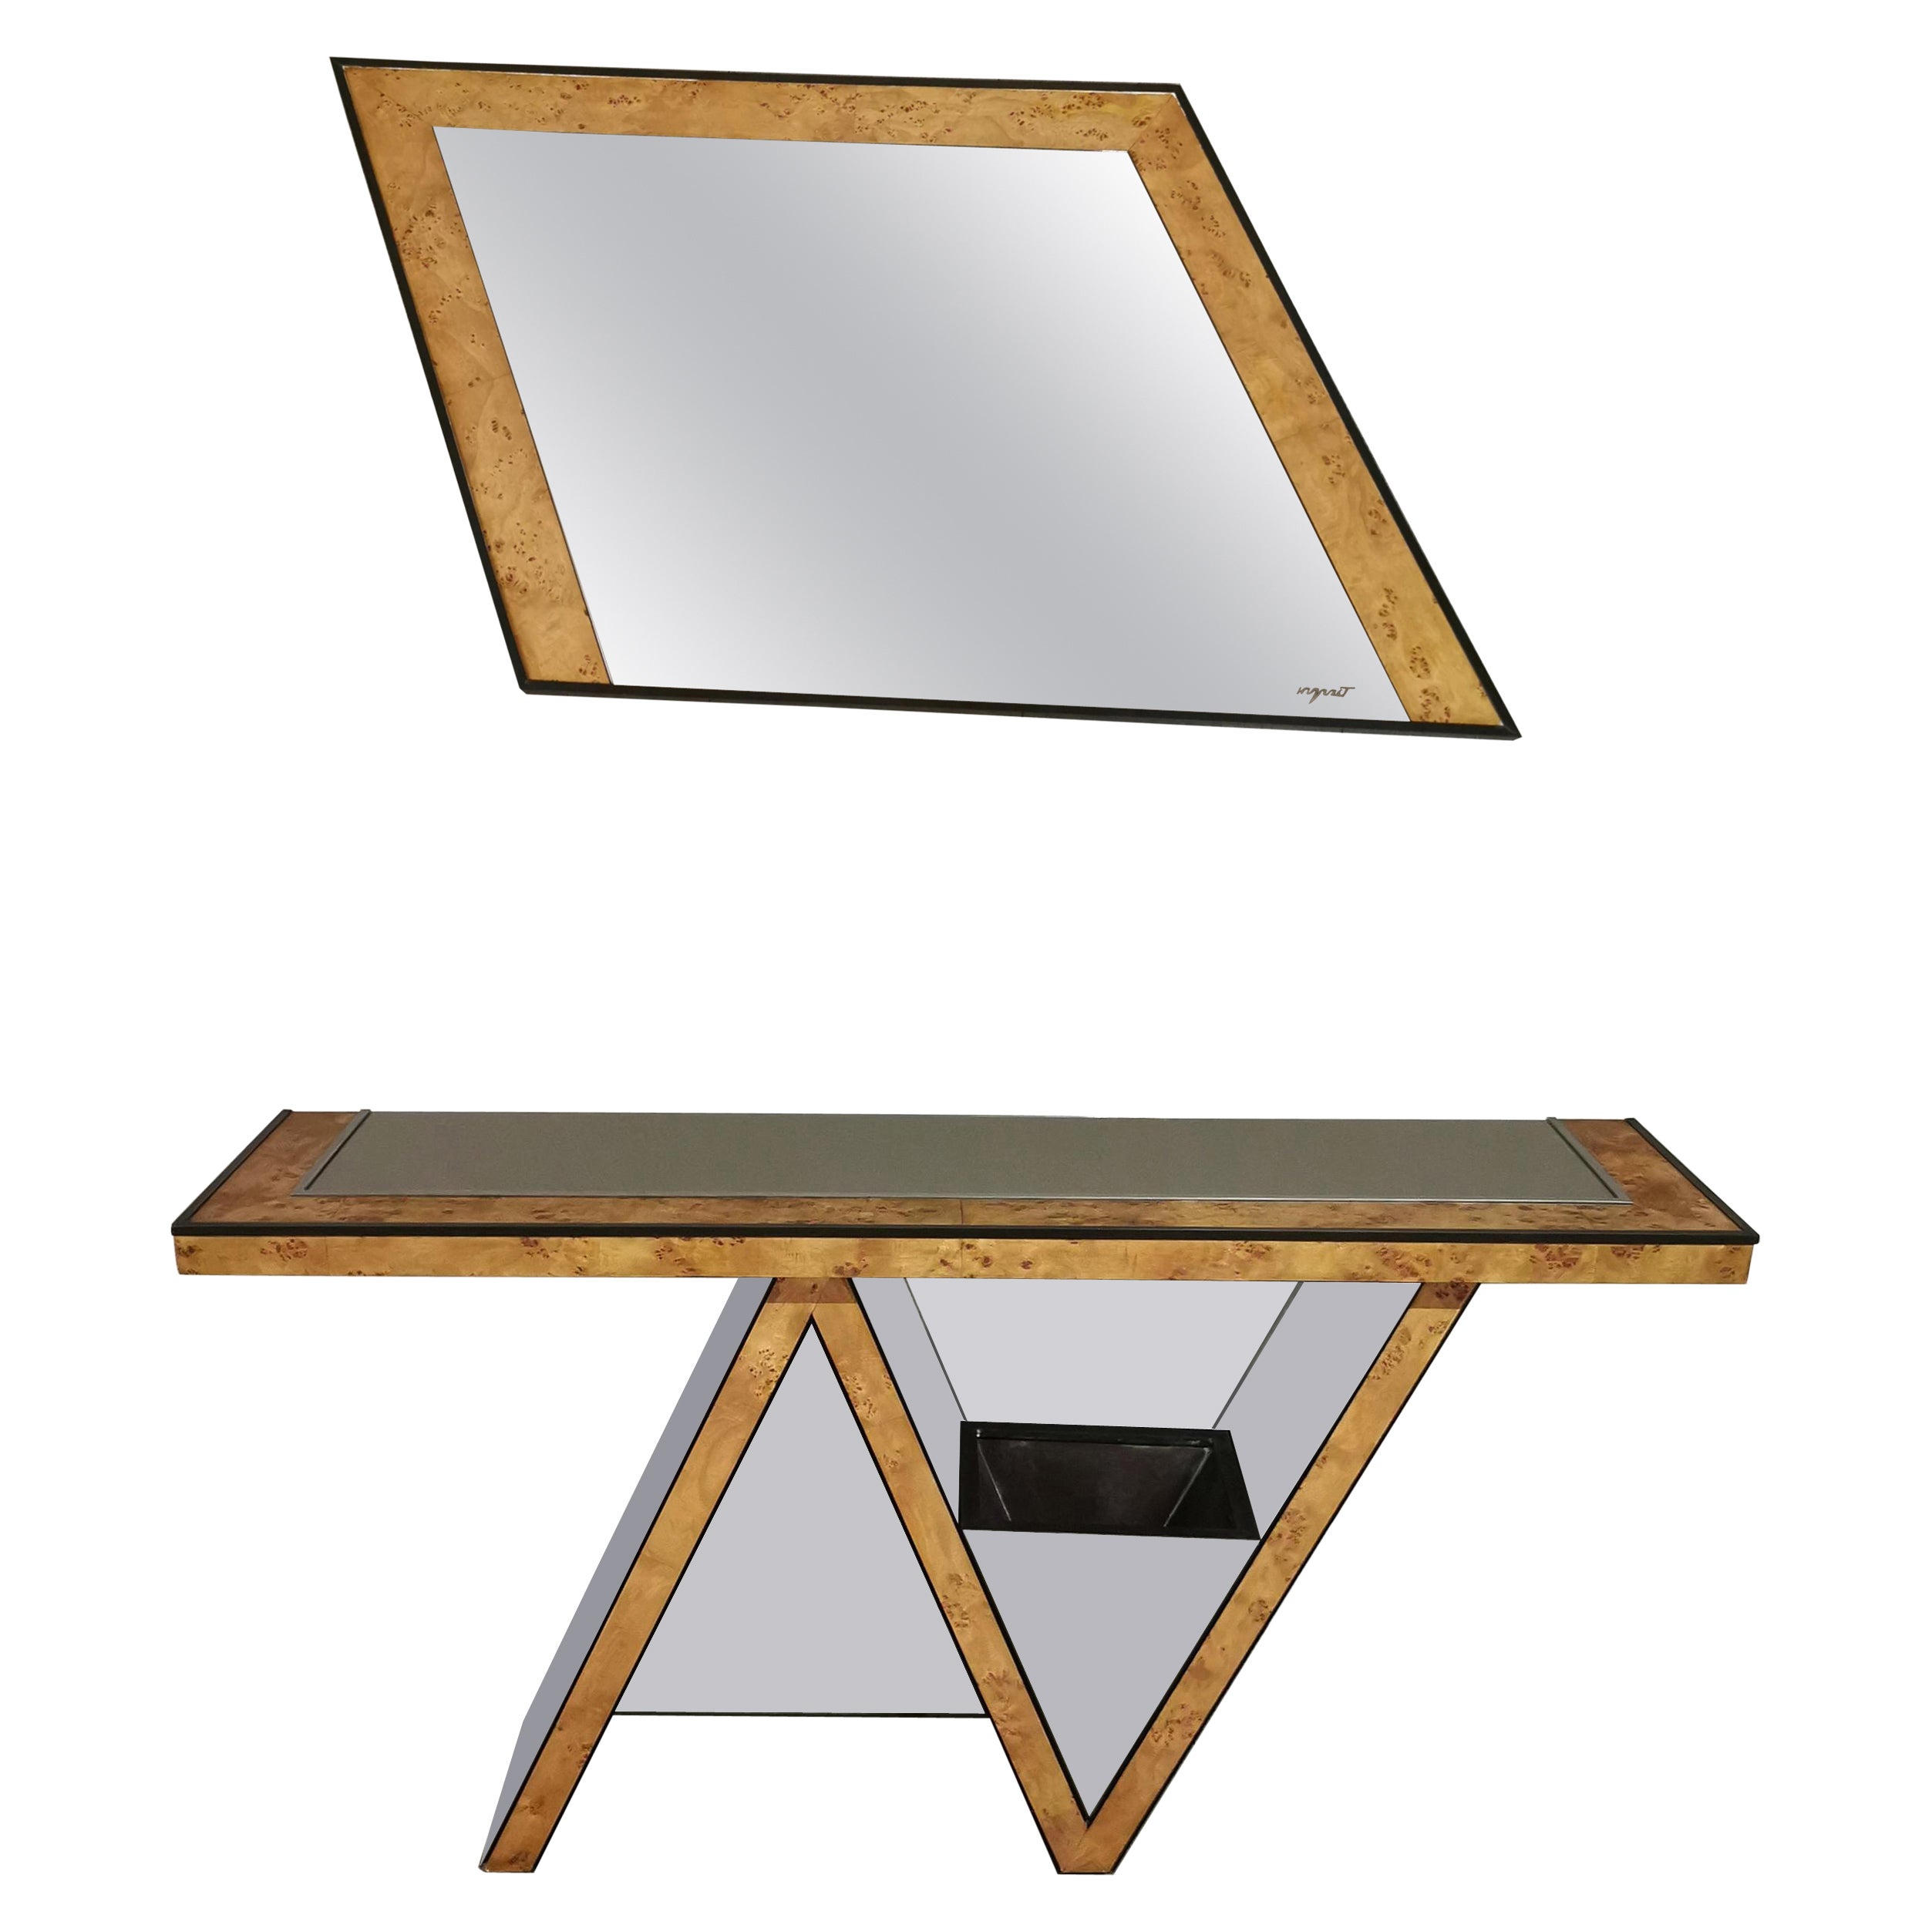  Console Table Wall Mirror Wood Brass Midcentury Italian Design 1970s Set of 2